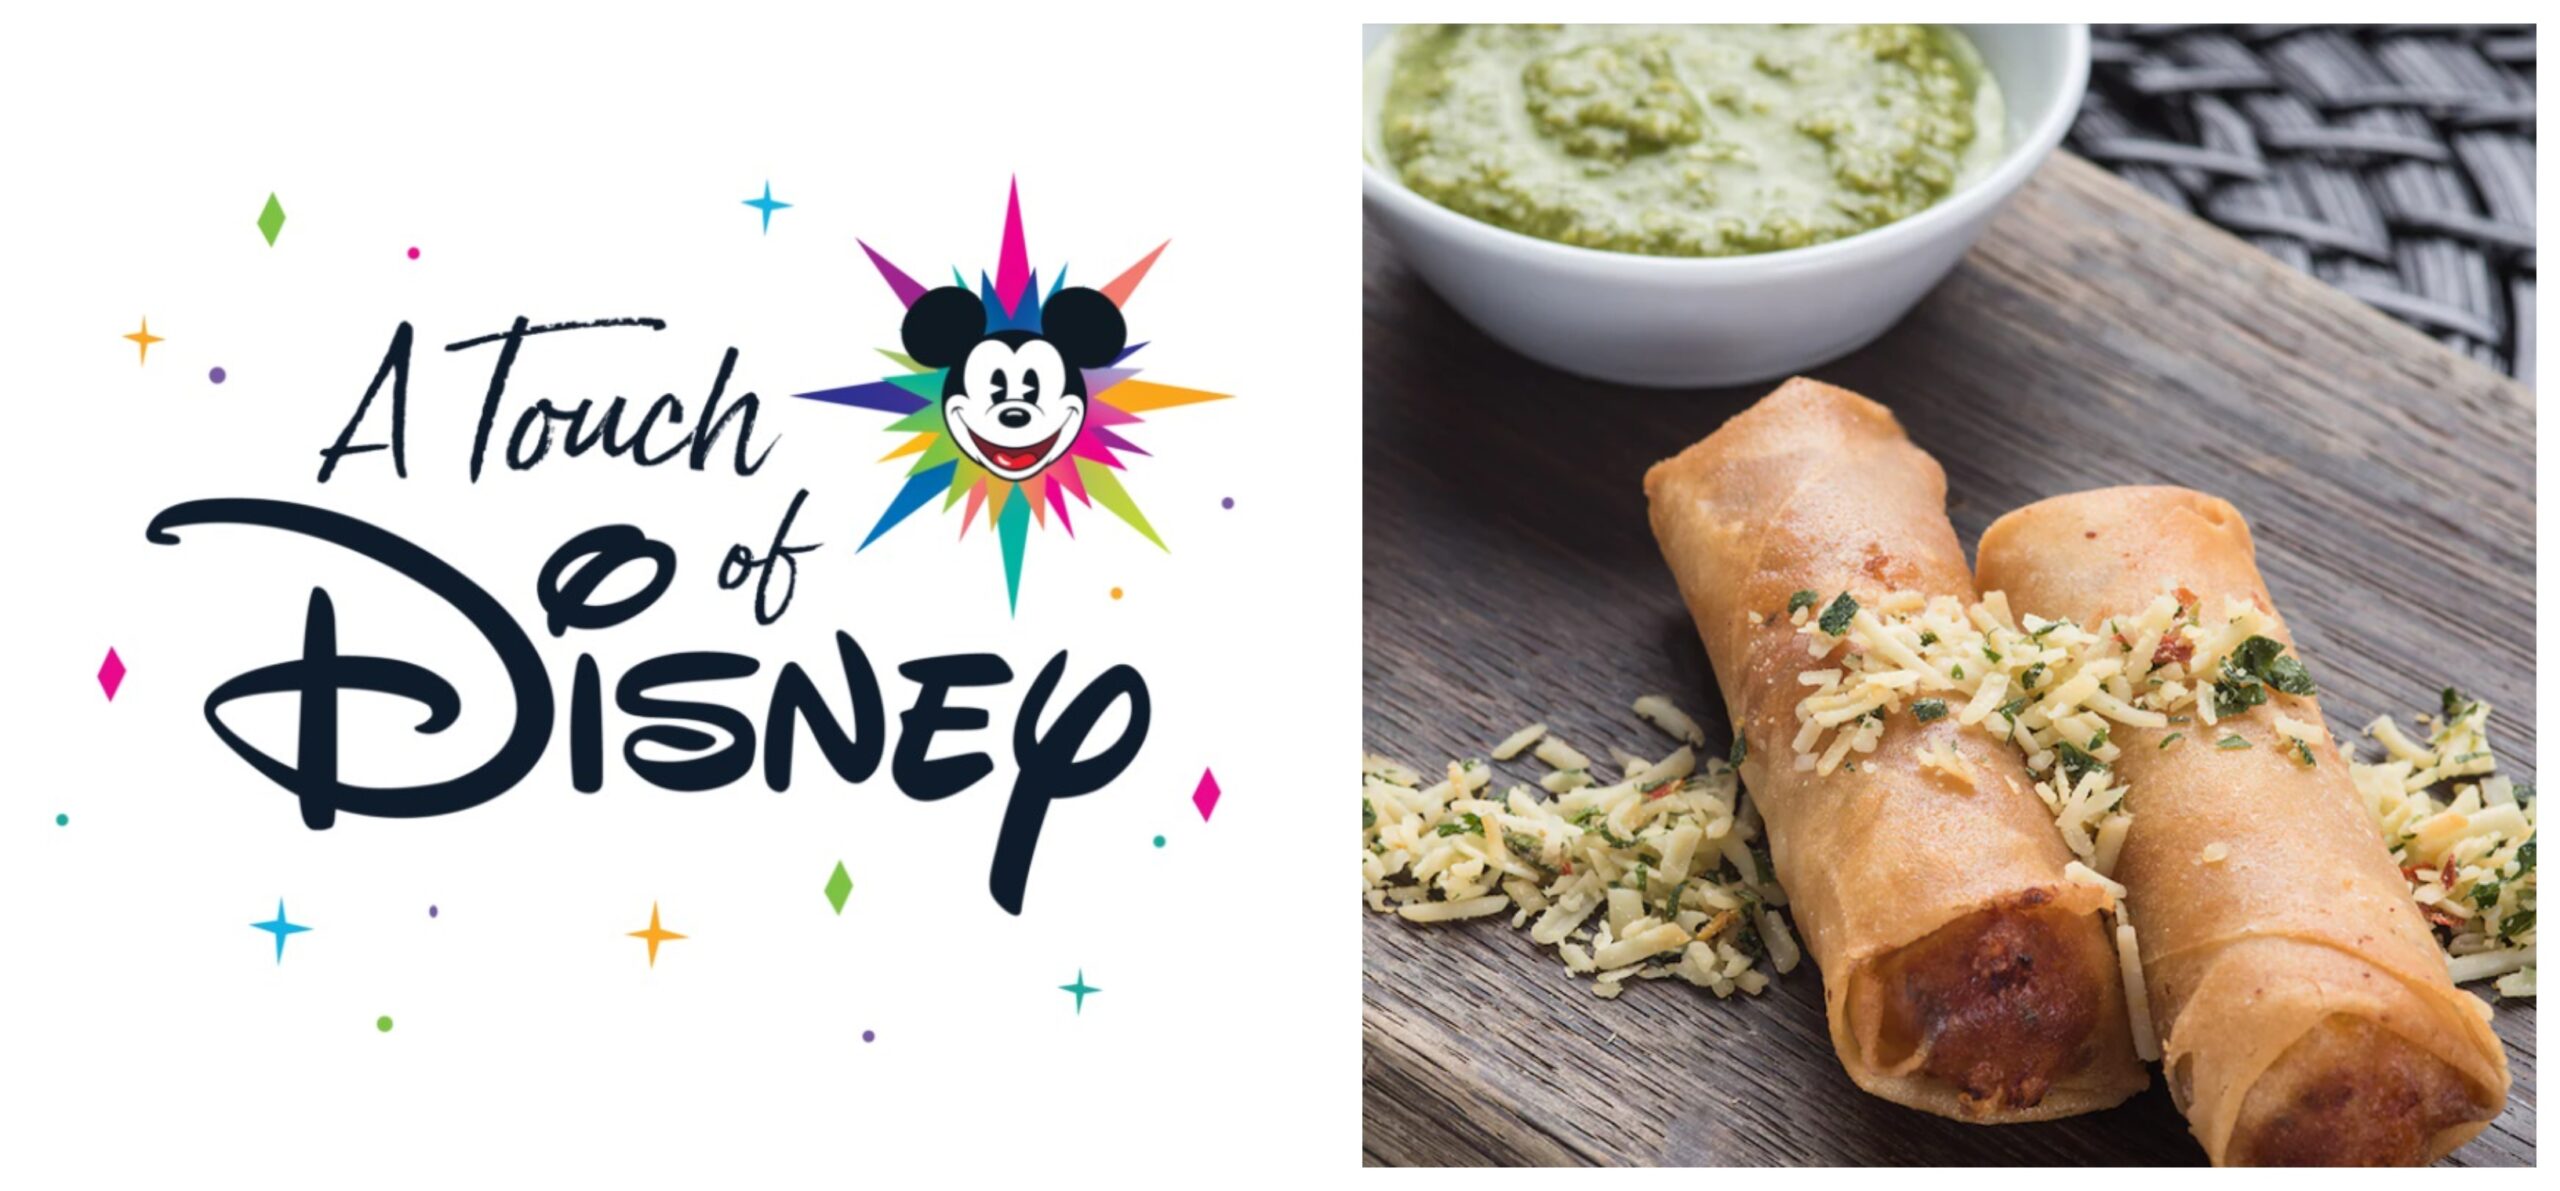 Marketplace Menus & Prices for 'A Touch of Disney' Event